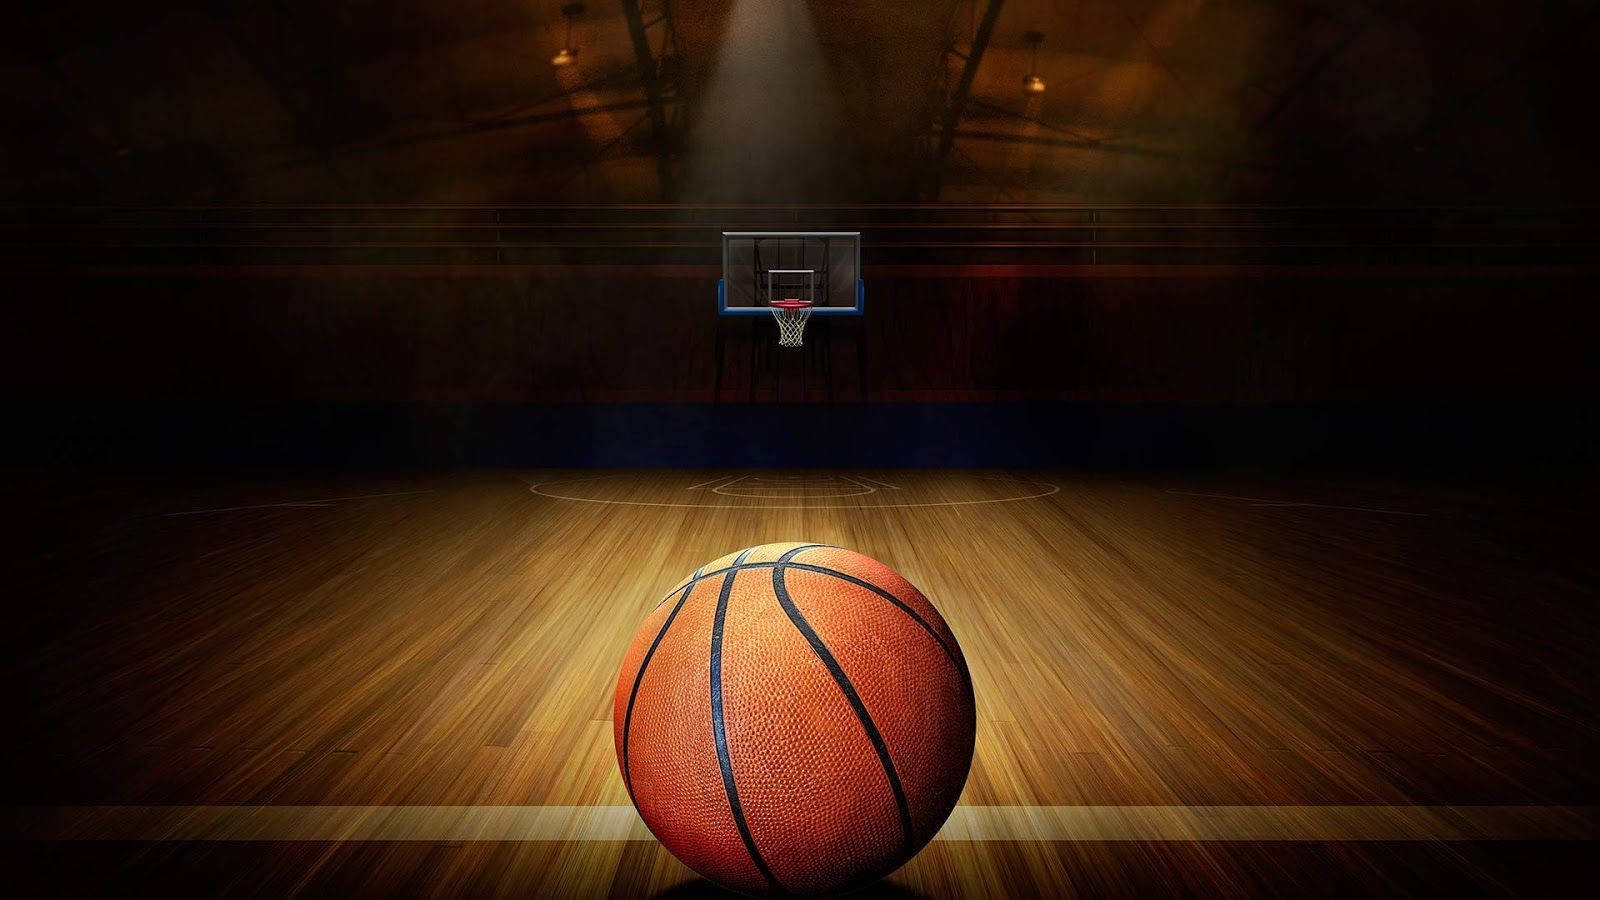 Get Ready To Shoot For The Basket! Wallpaper